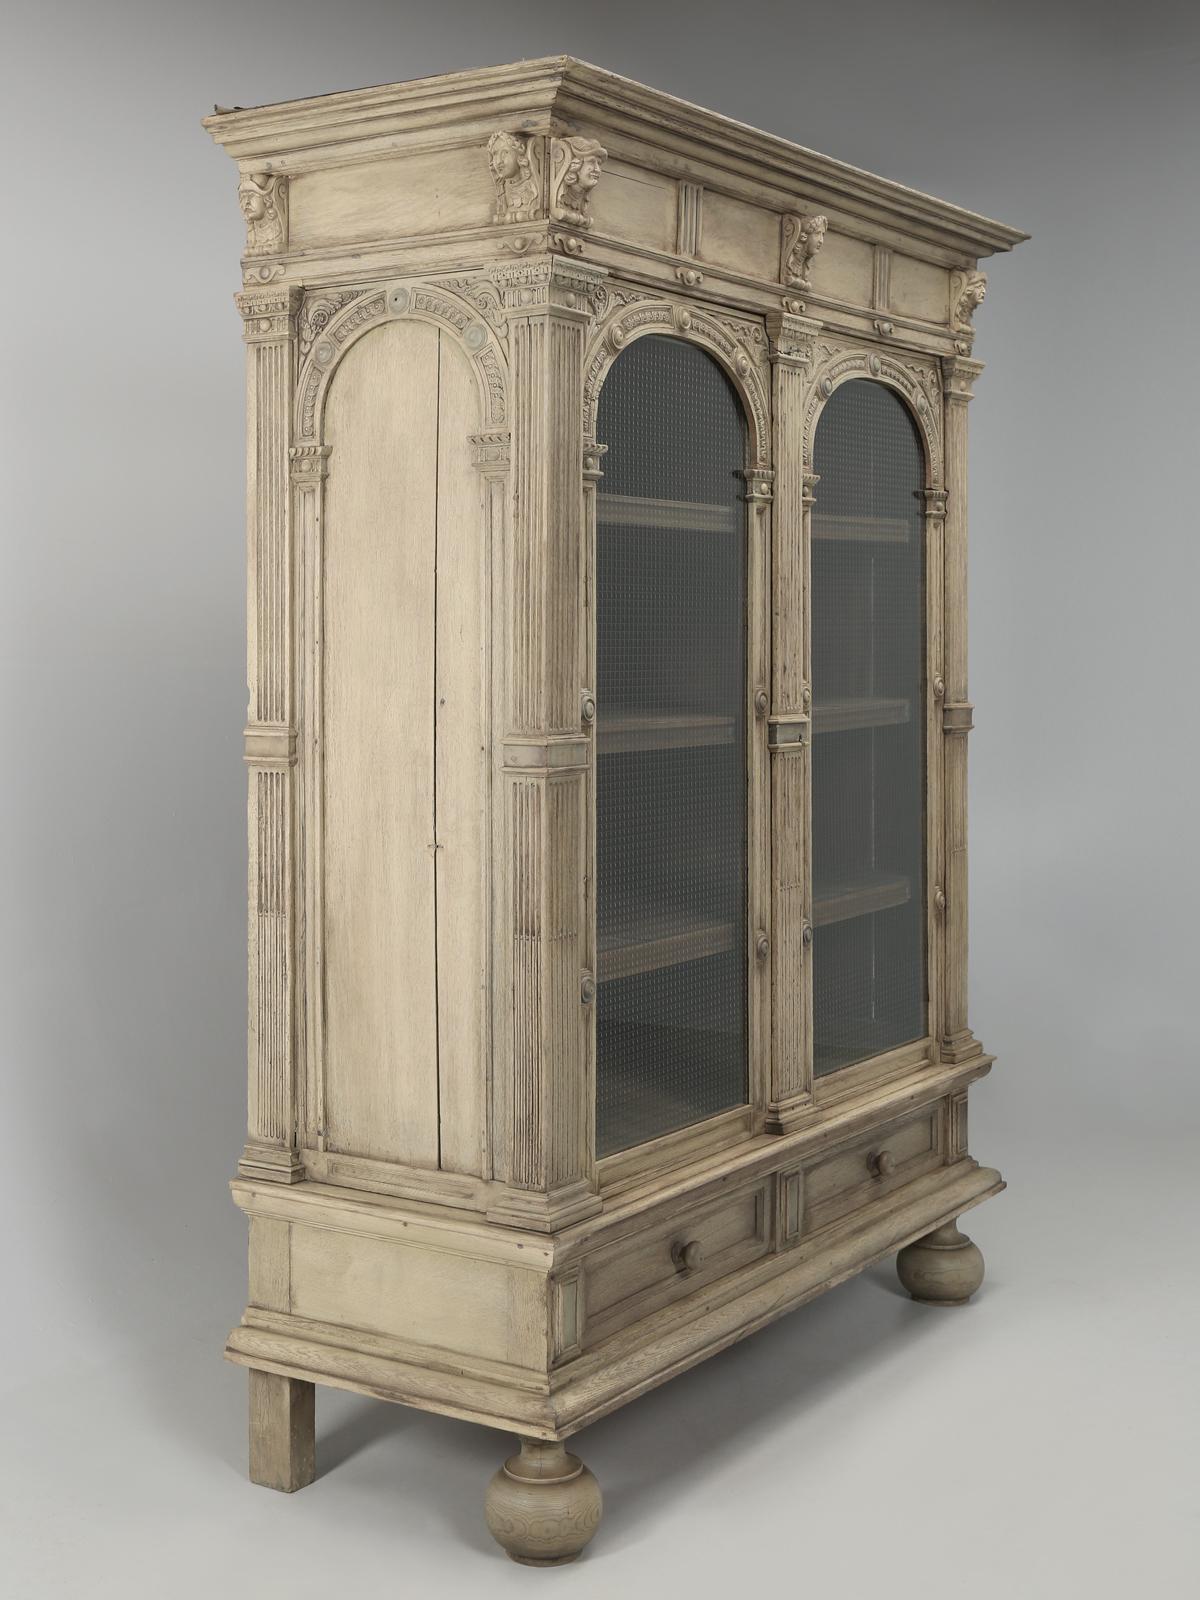 European Antique Continental Armoire of Bookcase, Limed Oak Finish, Completely Restored